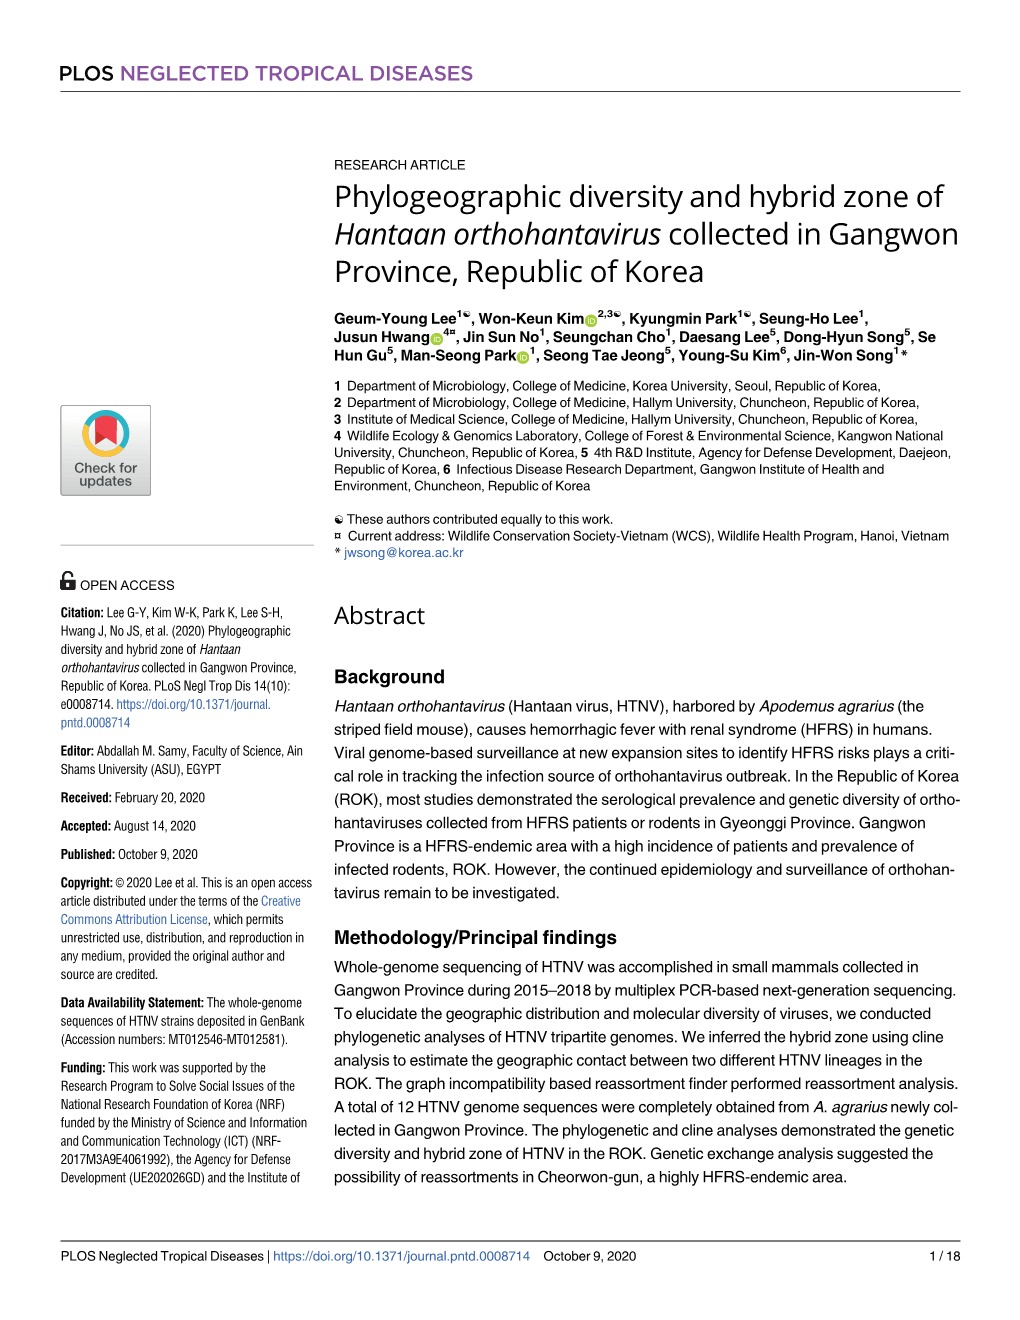 Phylogeographic Diversity and Hybrid Zone of Hantaan Orthohantavirus Collected in Gangwon Province, Republic of Korea